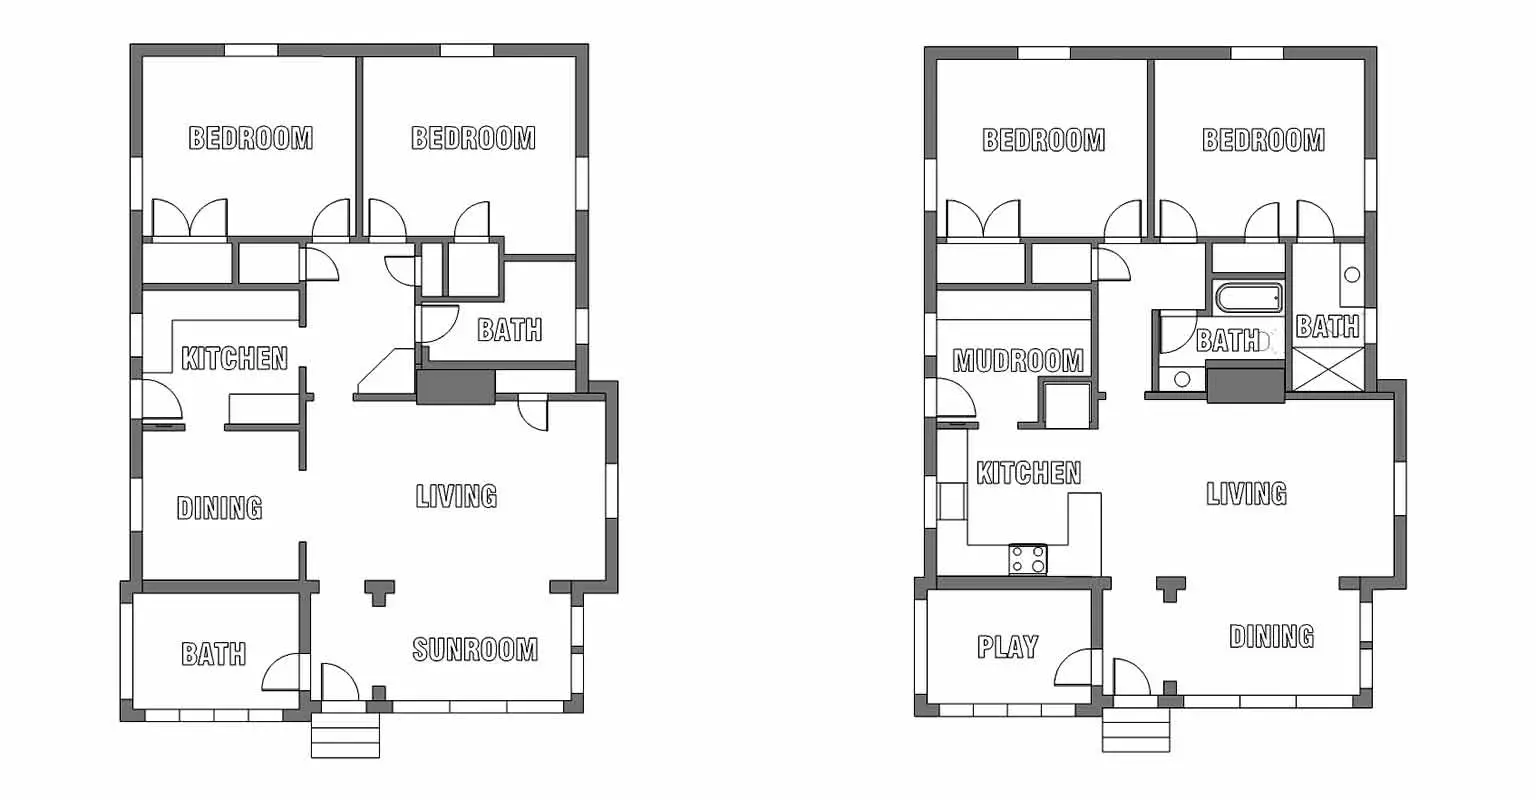 Original Floor Plan And Floor Plan For Phase One Renovation